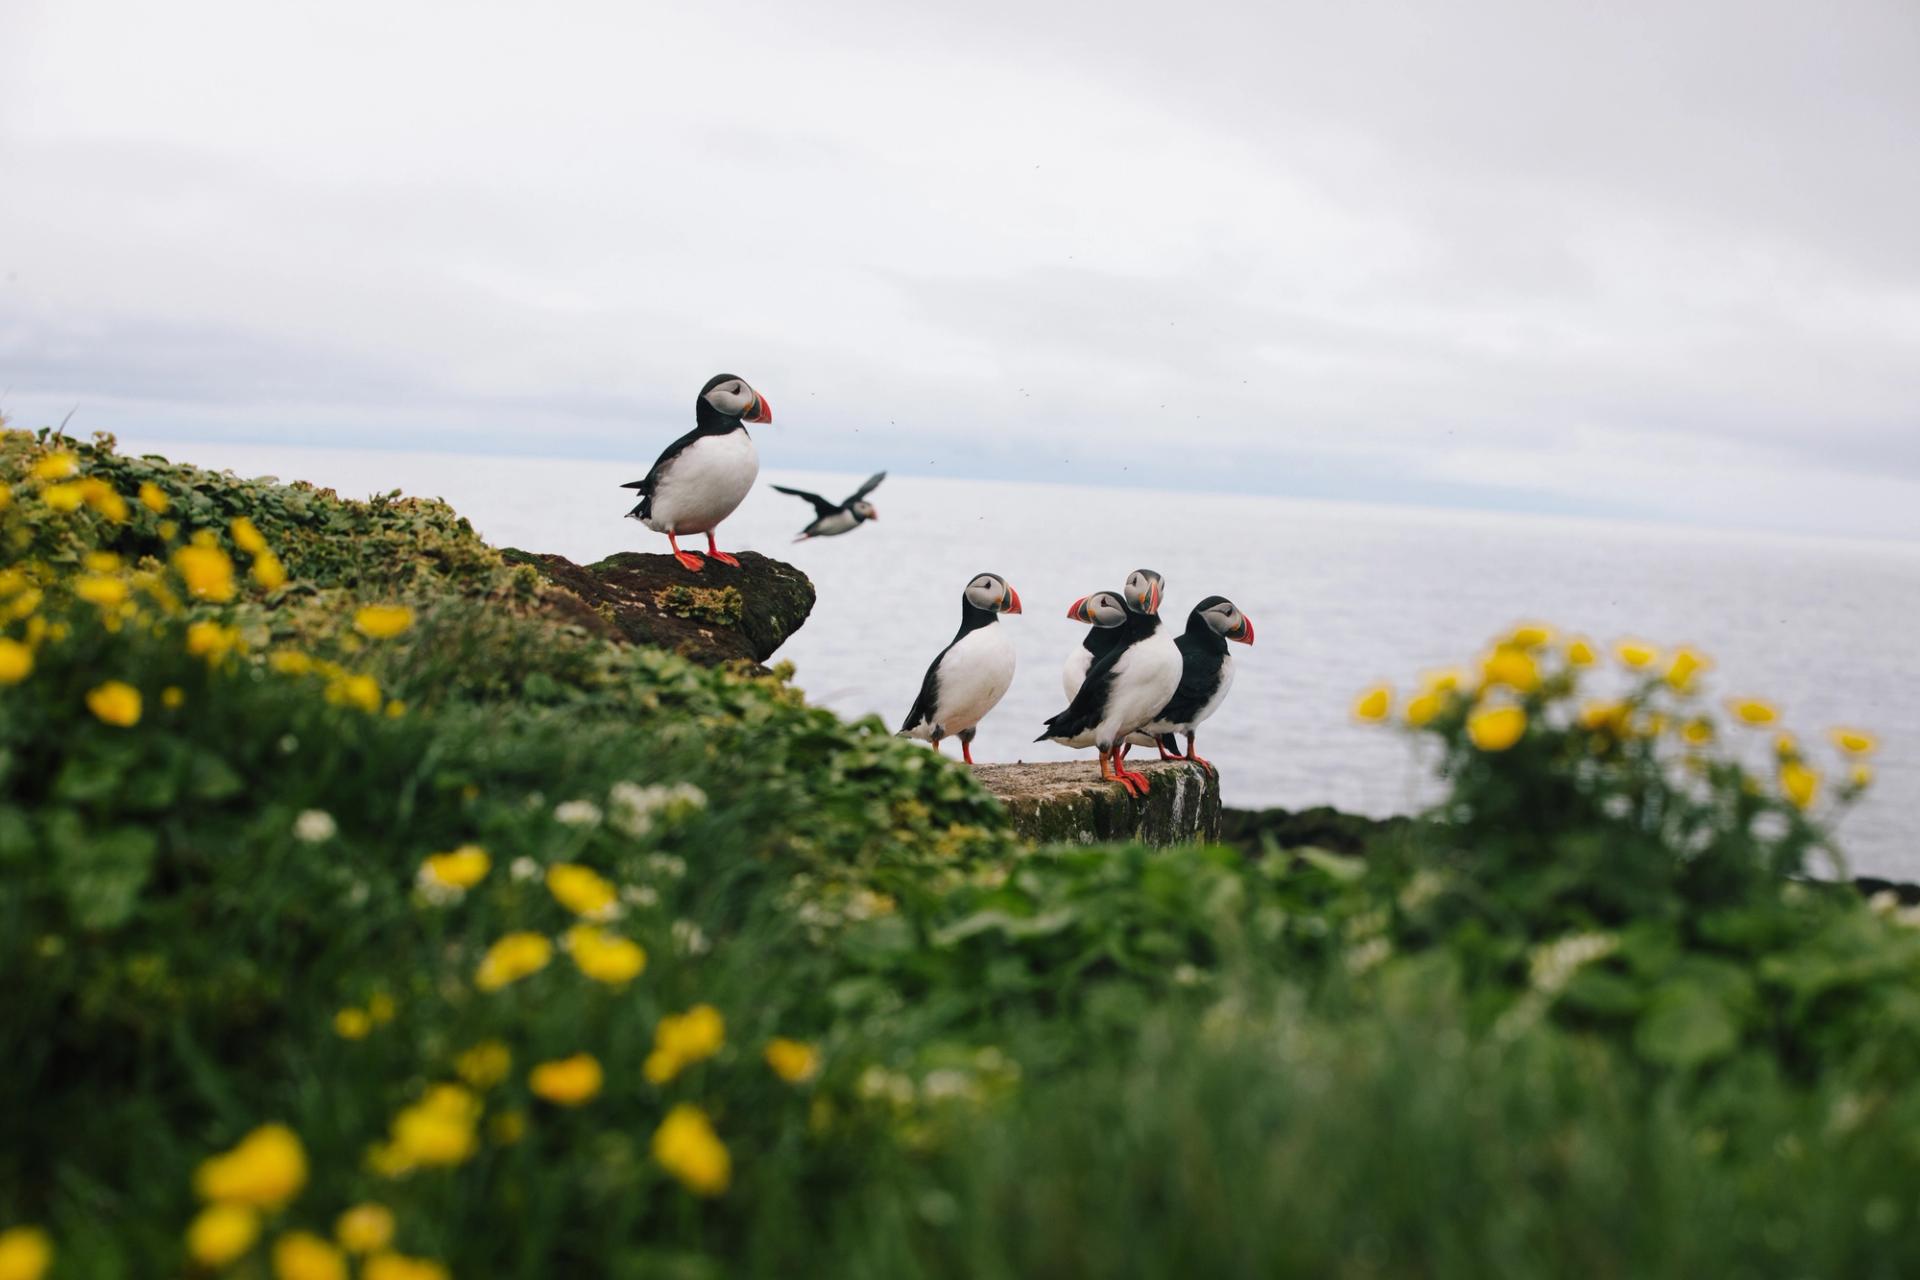 view on the Icelandic shearwaters, on Grimsey island. We see the shearwaters, the ocean, and small flowers 